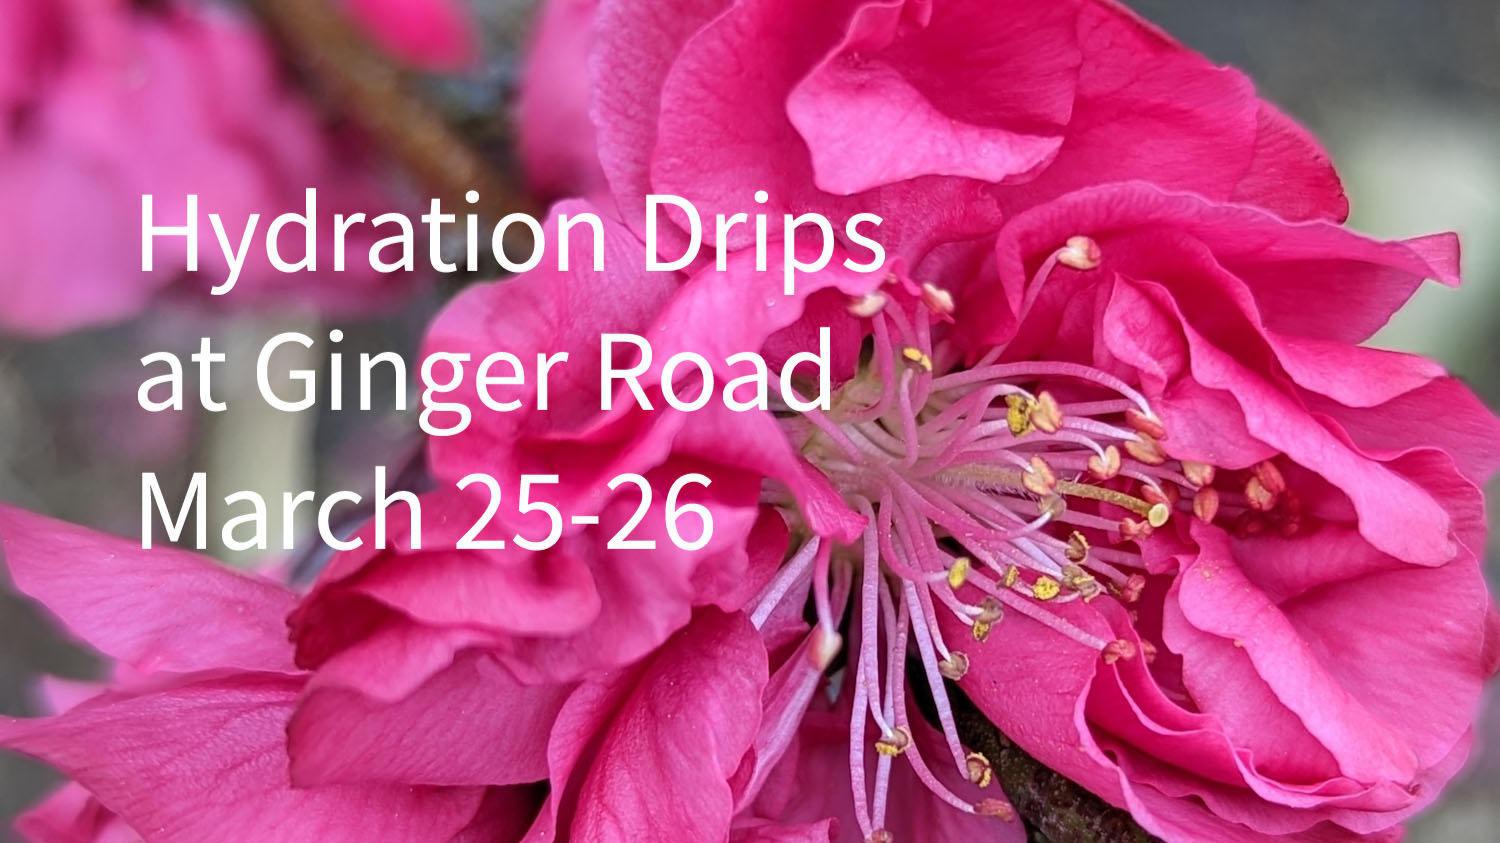 Join us for a Wellness Weekend on March 25 & 26 as we welcome our new RN, Kim Blanton from Firefly Drip Mobile IV Services. Spaces are limited,  contact us for an appointment.